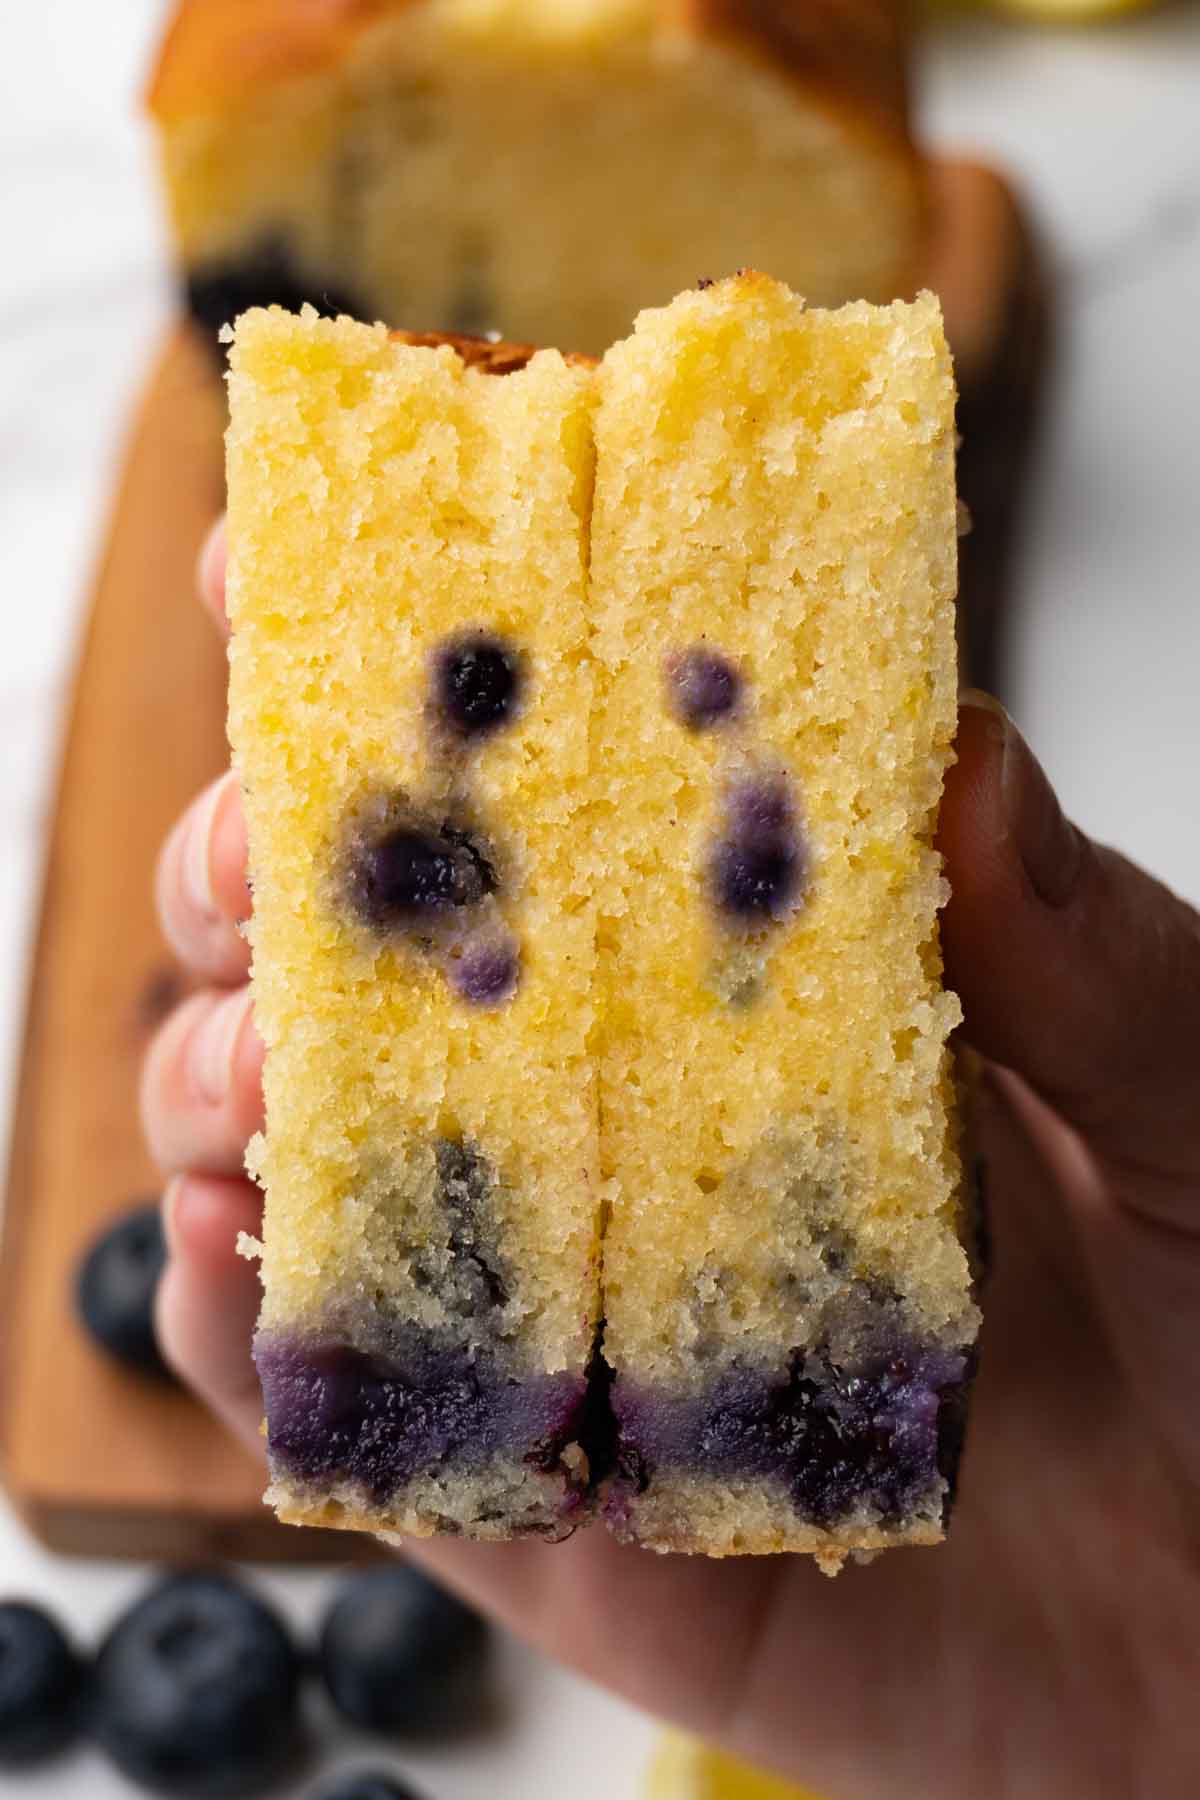 A hand is holding a cut in half slice of a pound cake with lemon zest and blueberries.